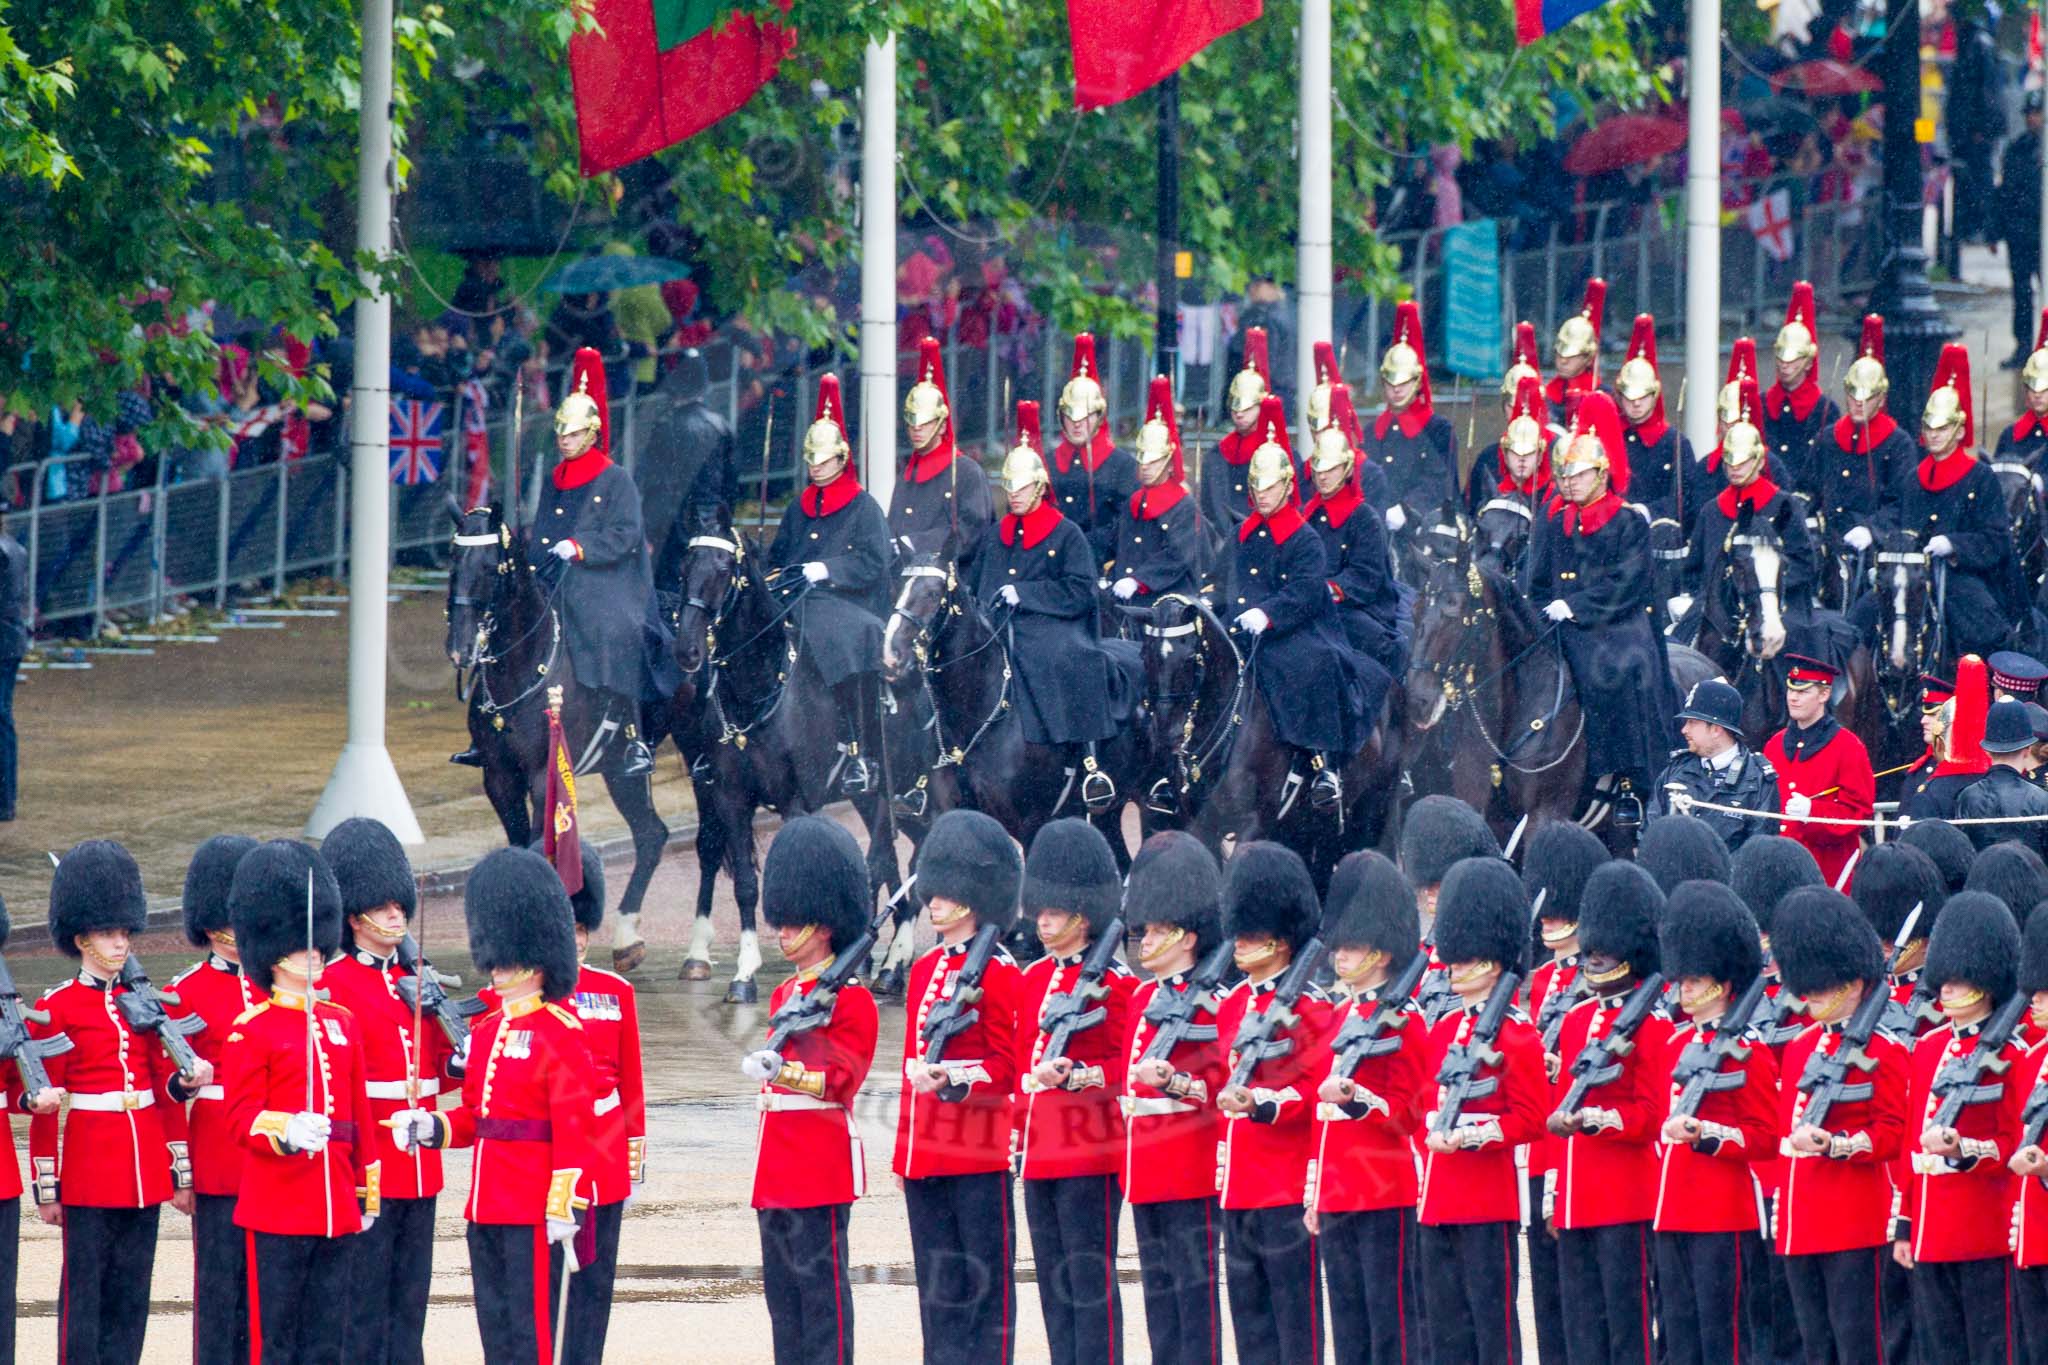 The Colonel's Review 2014.
Horse Guards Parade, Westminster,
London,

United Kingdom,
on 07 June 2014 at 10:56, image #234